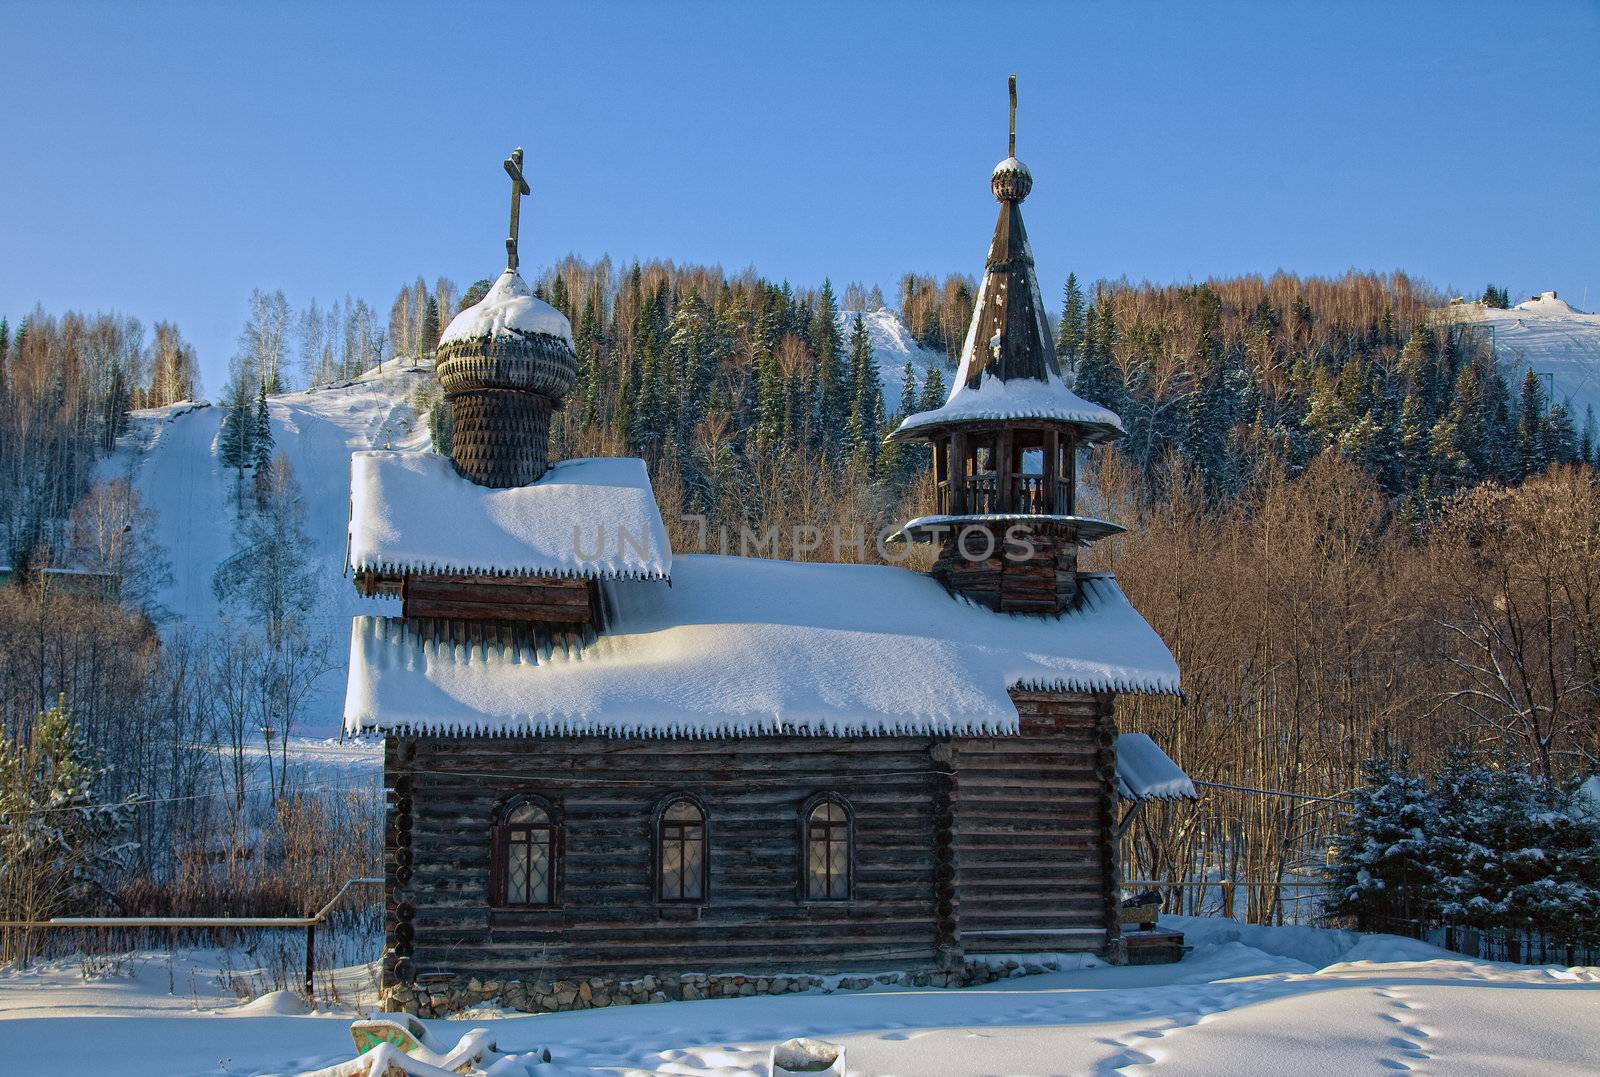 old russian wooden church photo